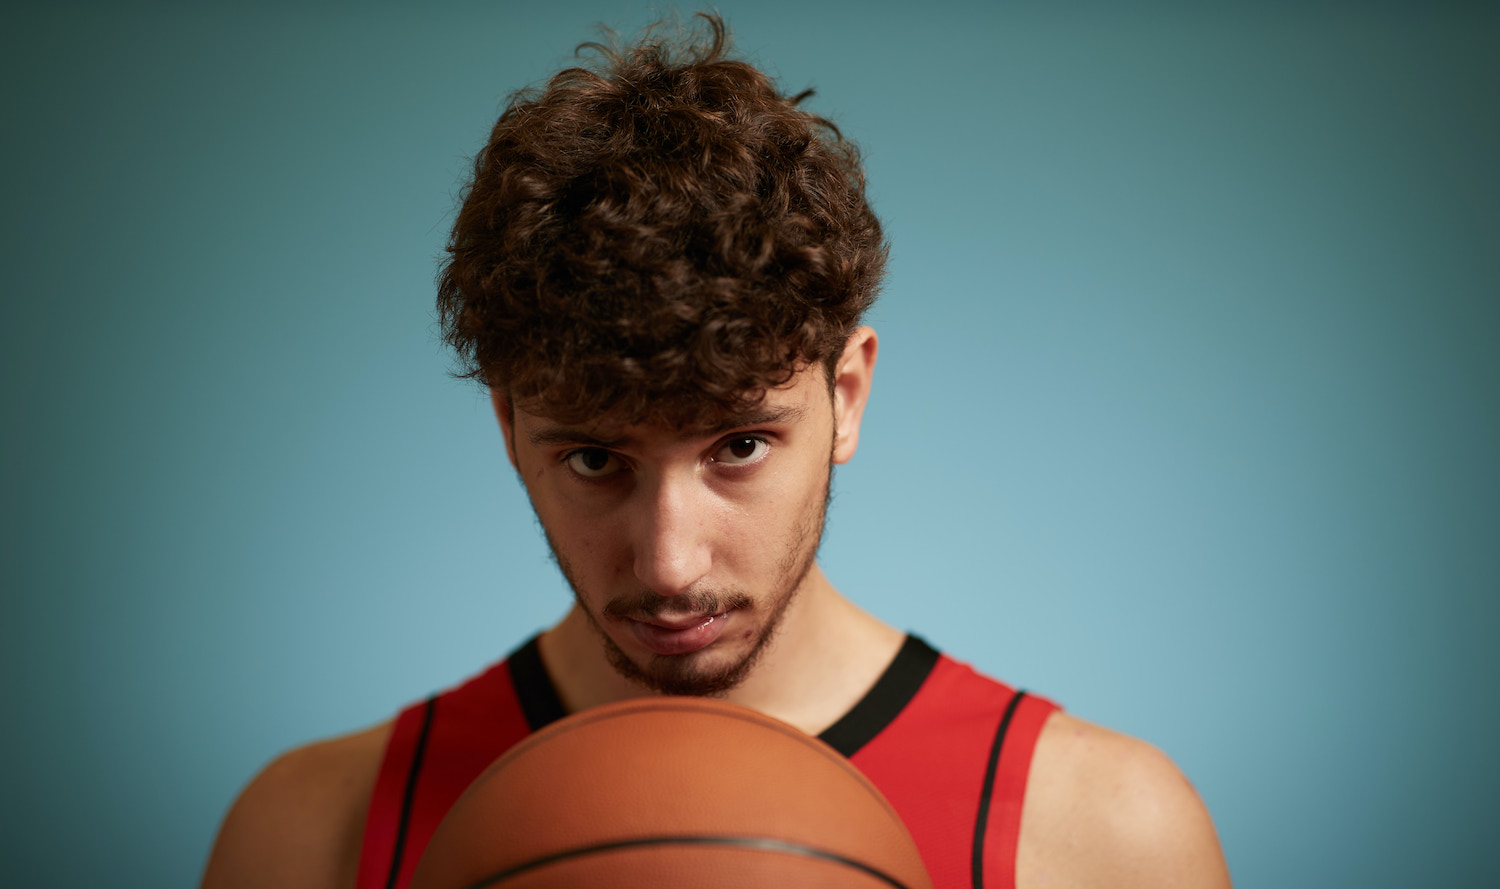 LAS VEGAS, NEVADA - AUGUST 14: Alperen Sengun #28 of the Houston Rockets poses for a portrait during the 2021 NBA rookie photo shoot on August 14, 2021 in Las Vegas, Nevada. (Photo by Joe Scarnici/Getty Images)